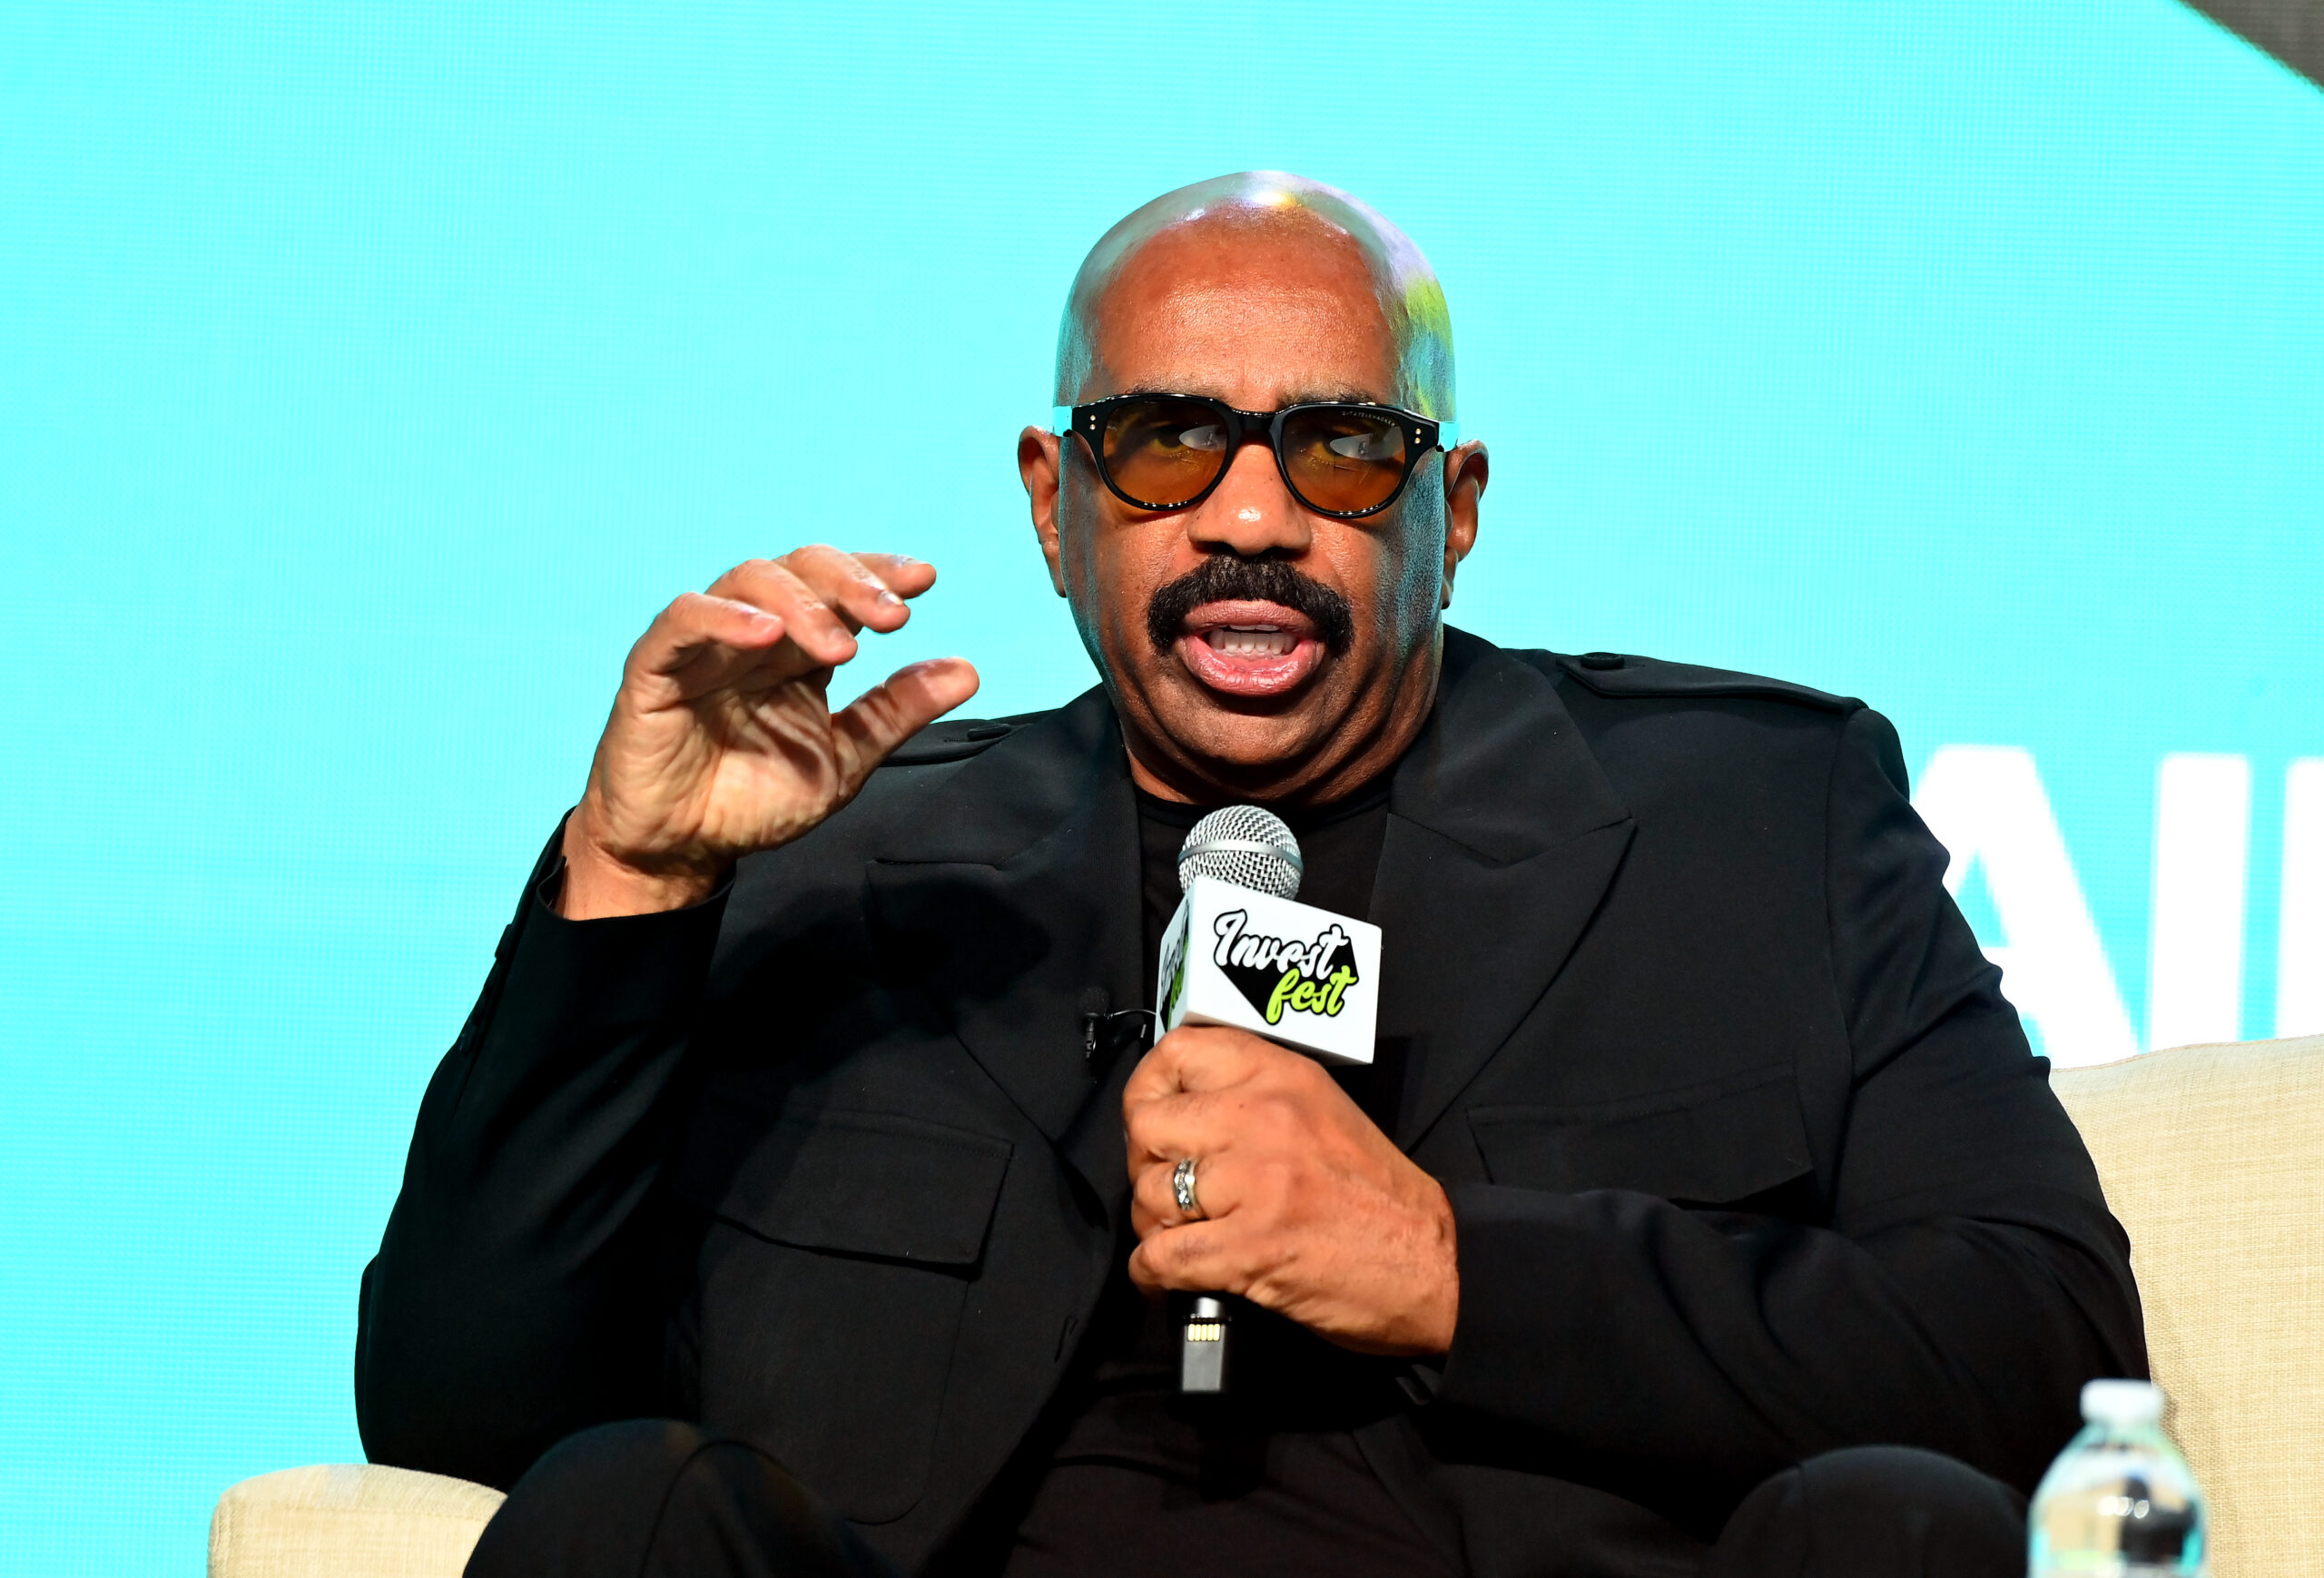 Steve Harvey Shares Encouraging Words to Followers About Achieving Their Dreams